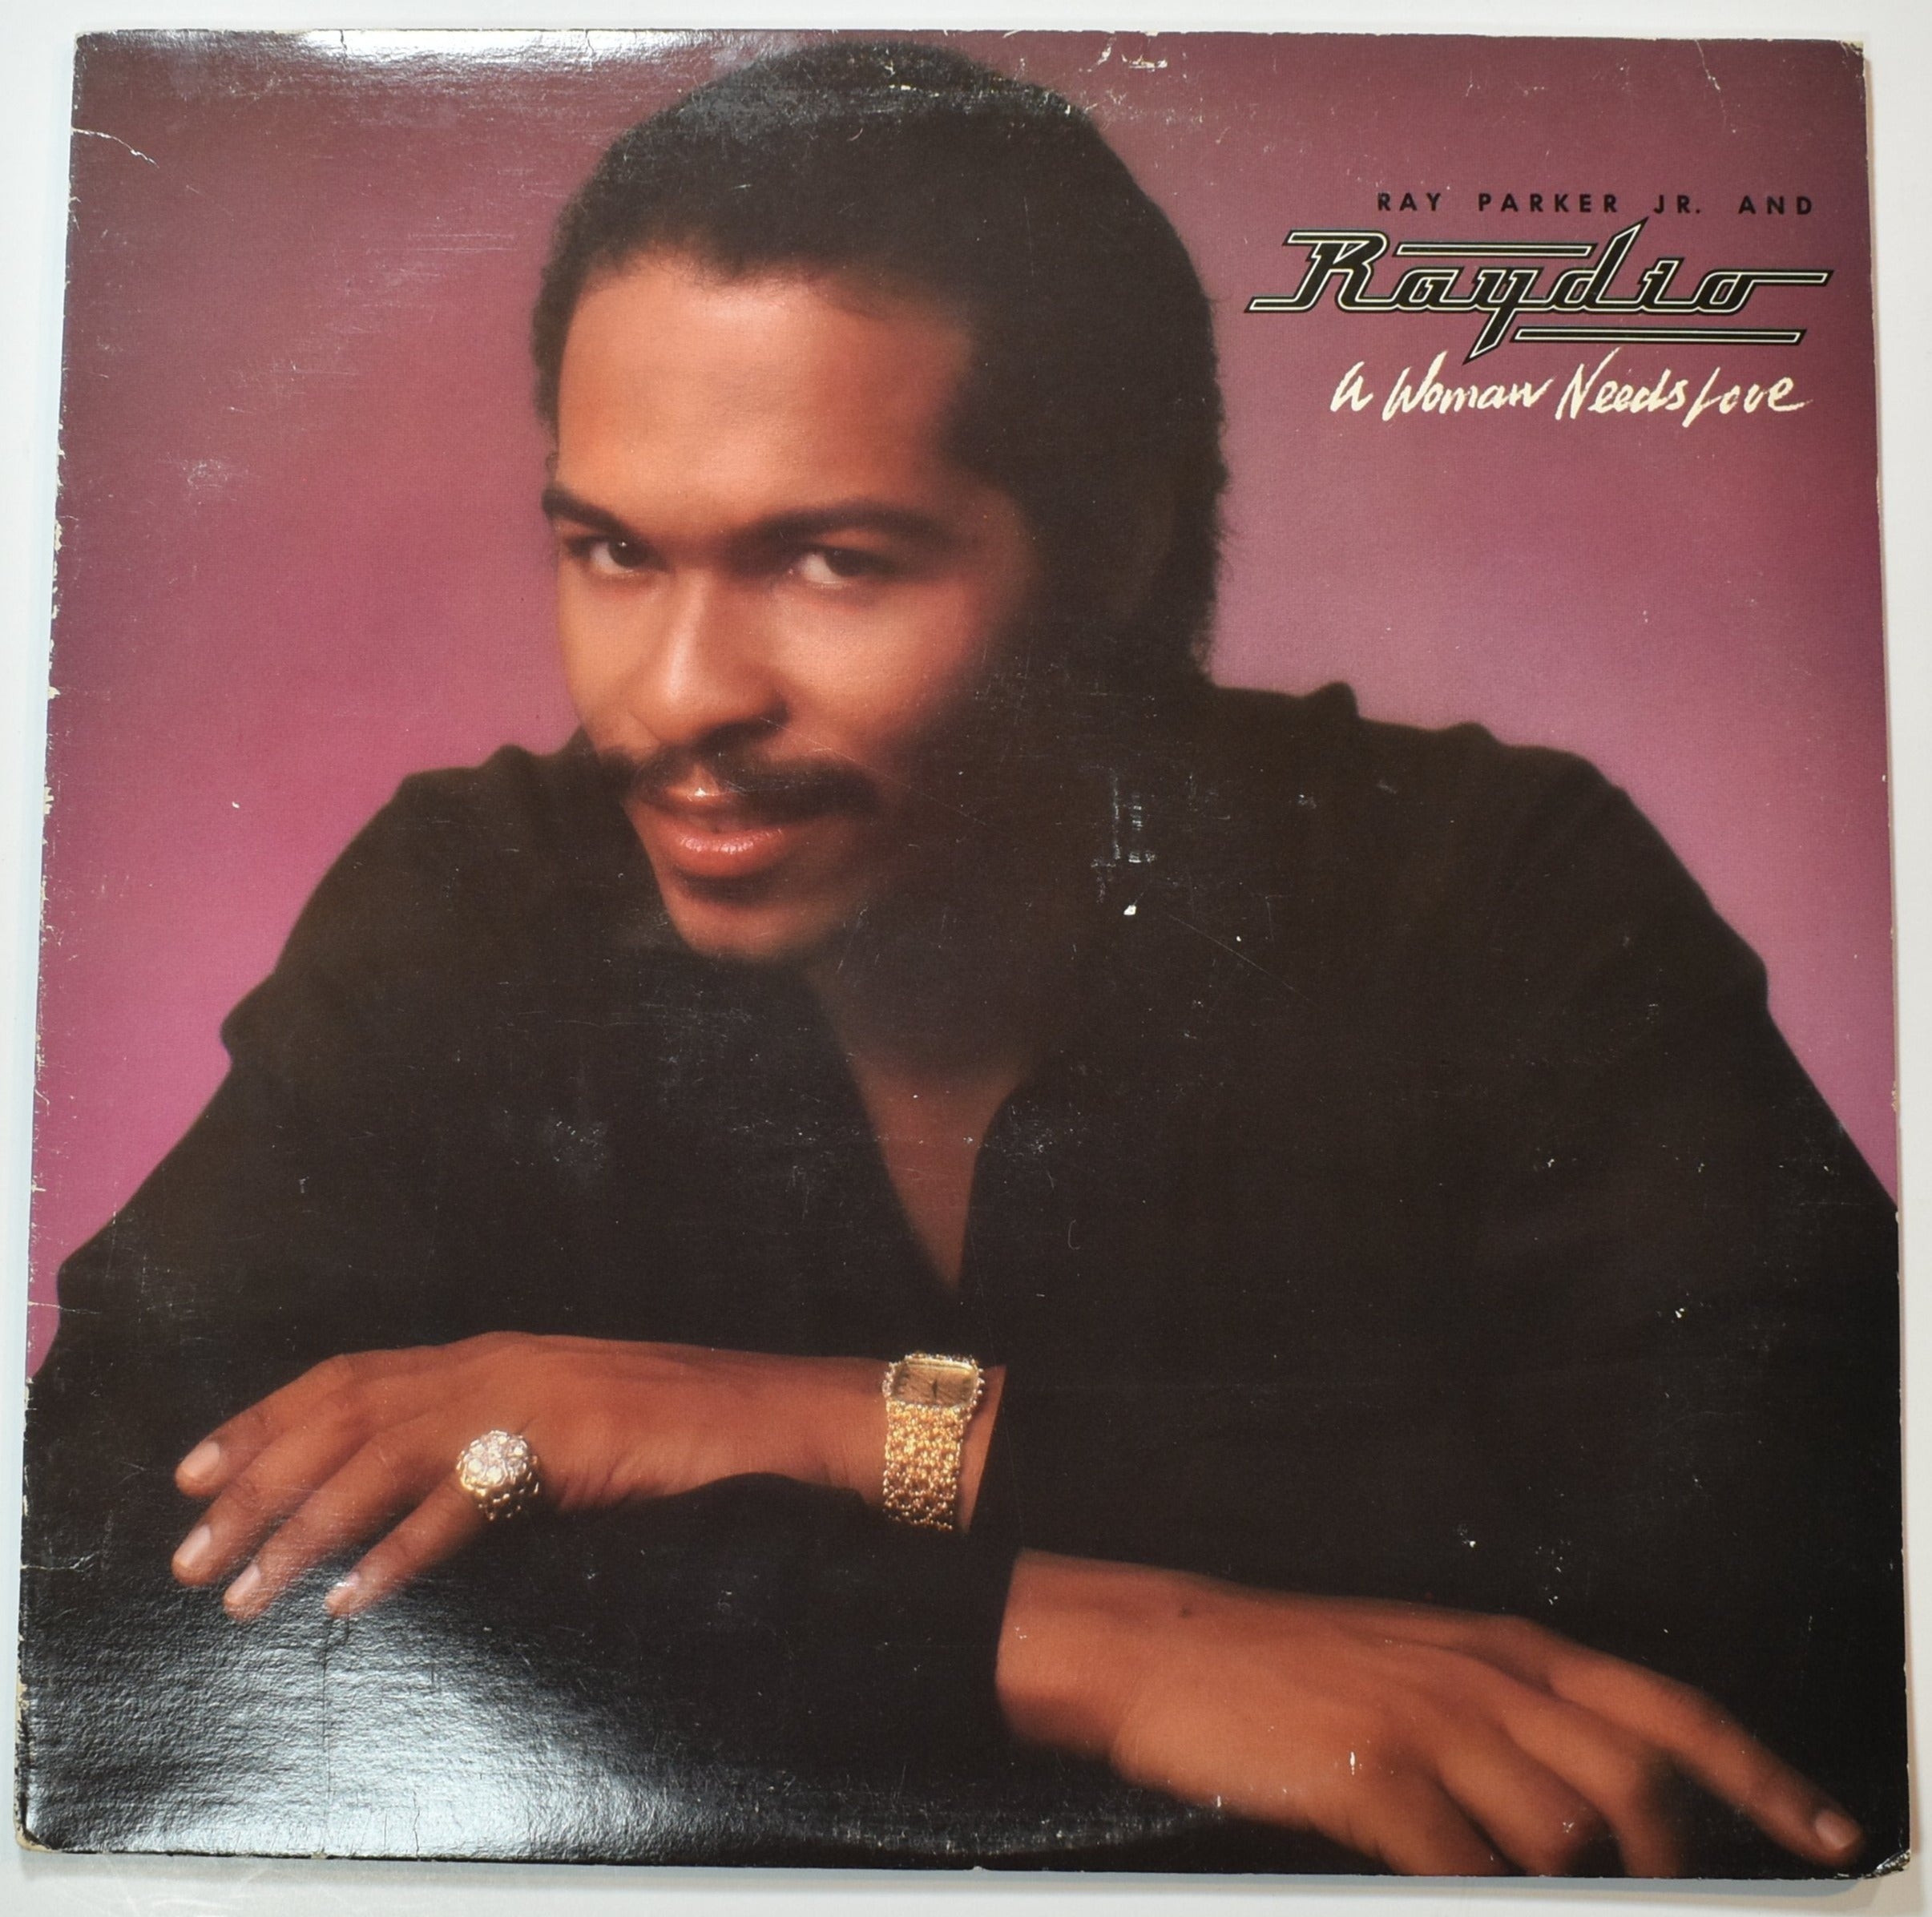 Vinyl Music Record Ray Parker Jr. and A woman needs love used record